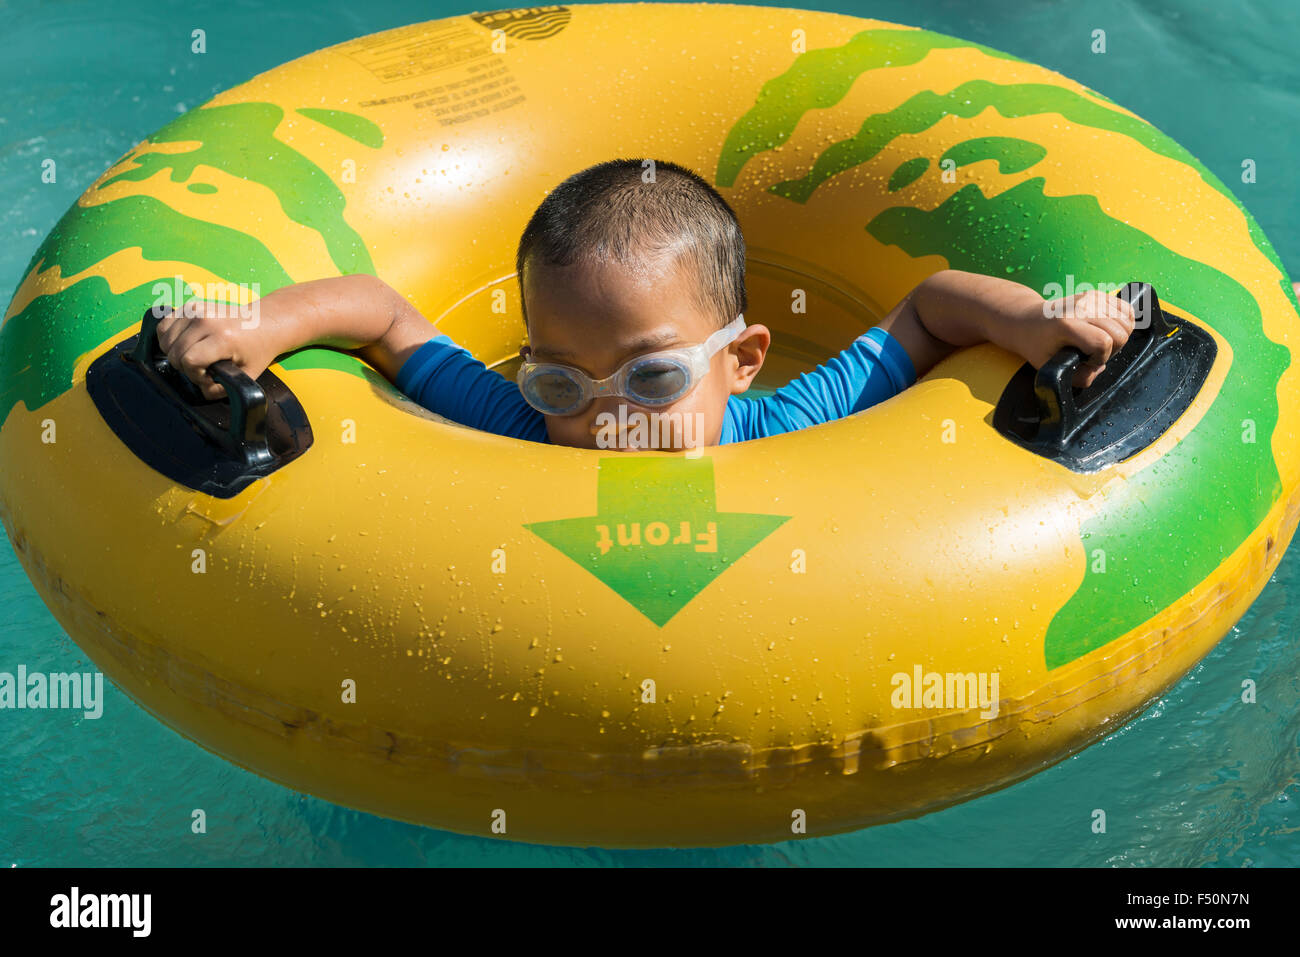 A little boy is playing in a yellow swim ring at Wonder La, the big amusement park outside of Bangalore. The park features a wid Stock Photo